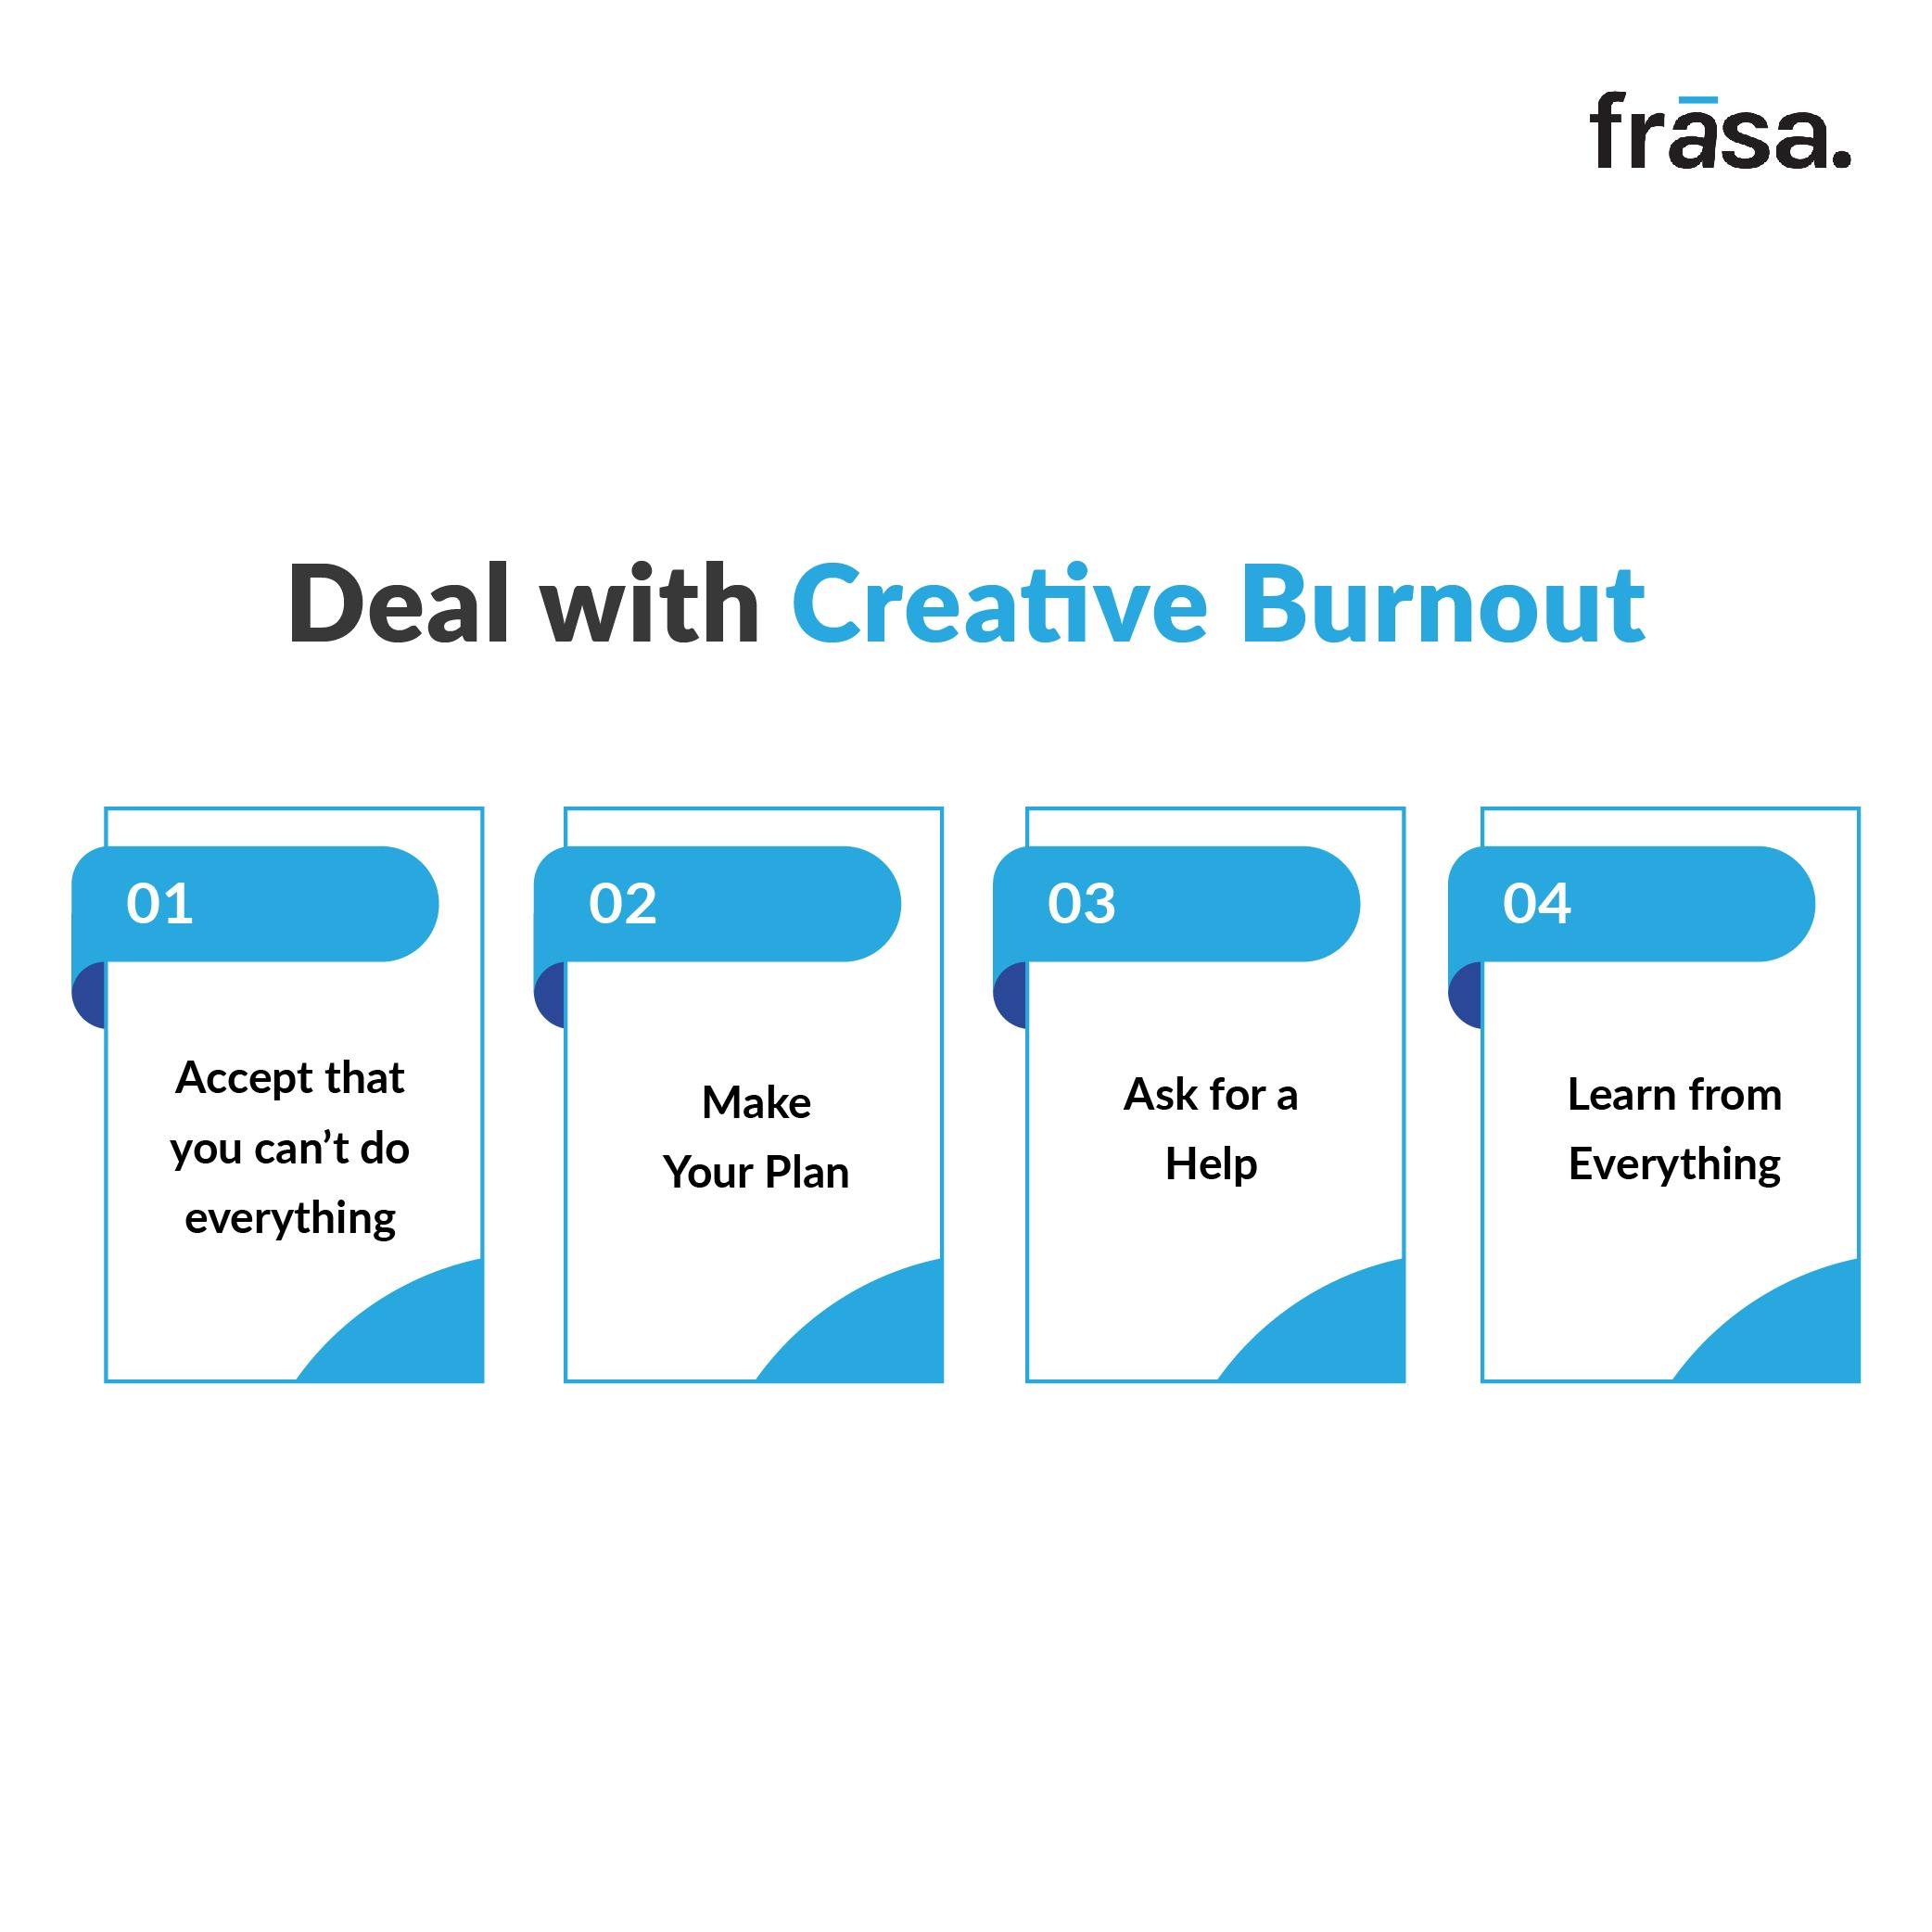 Dealing with Creative Burnout